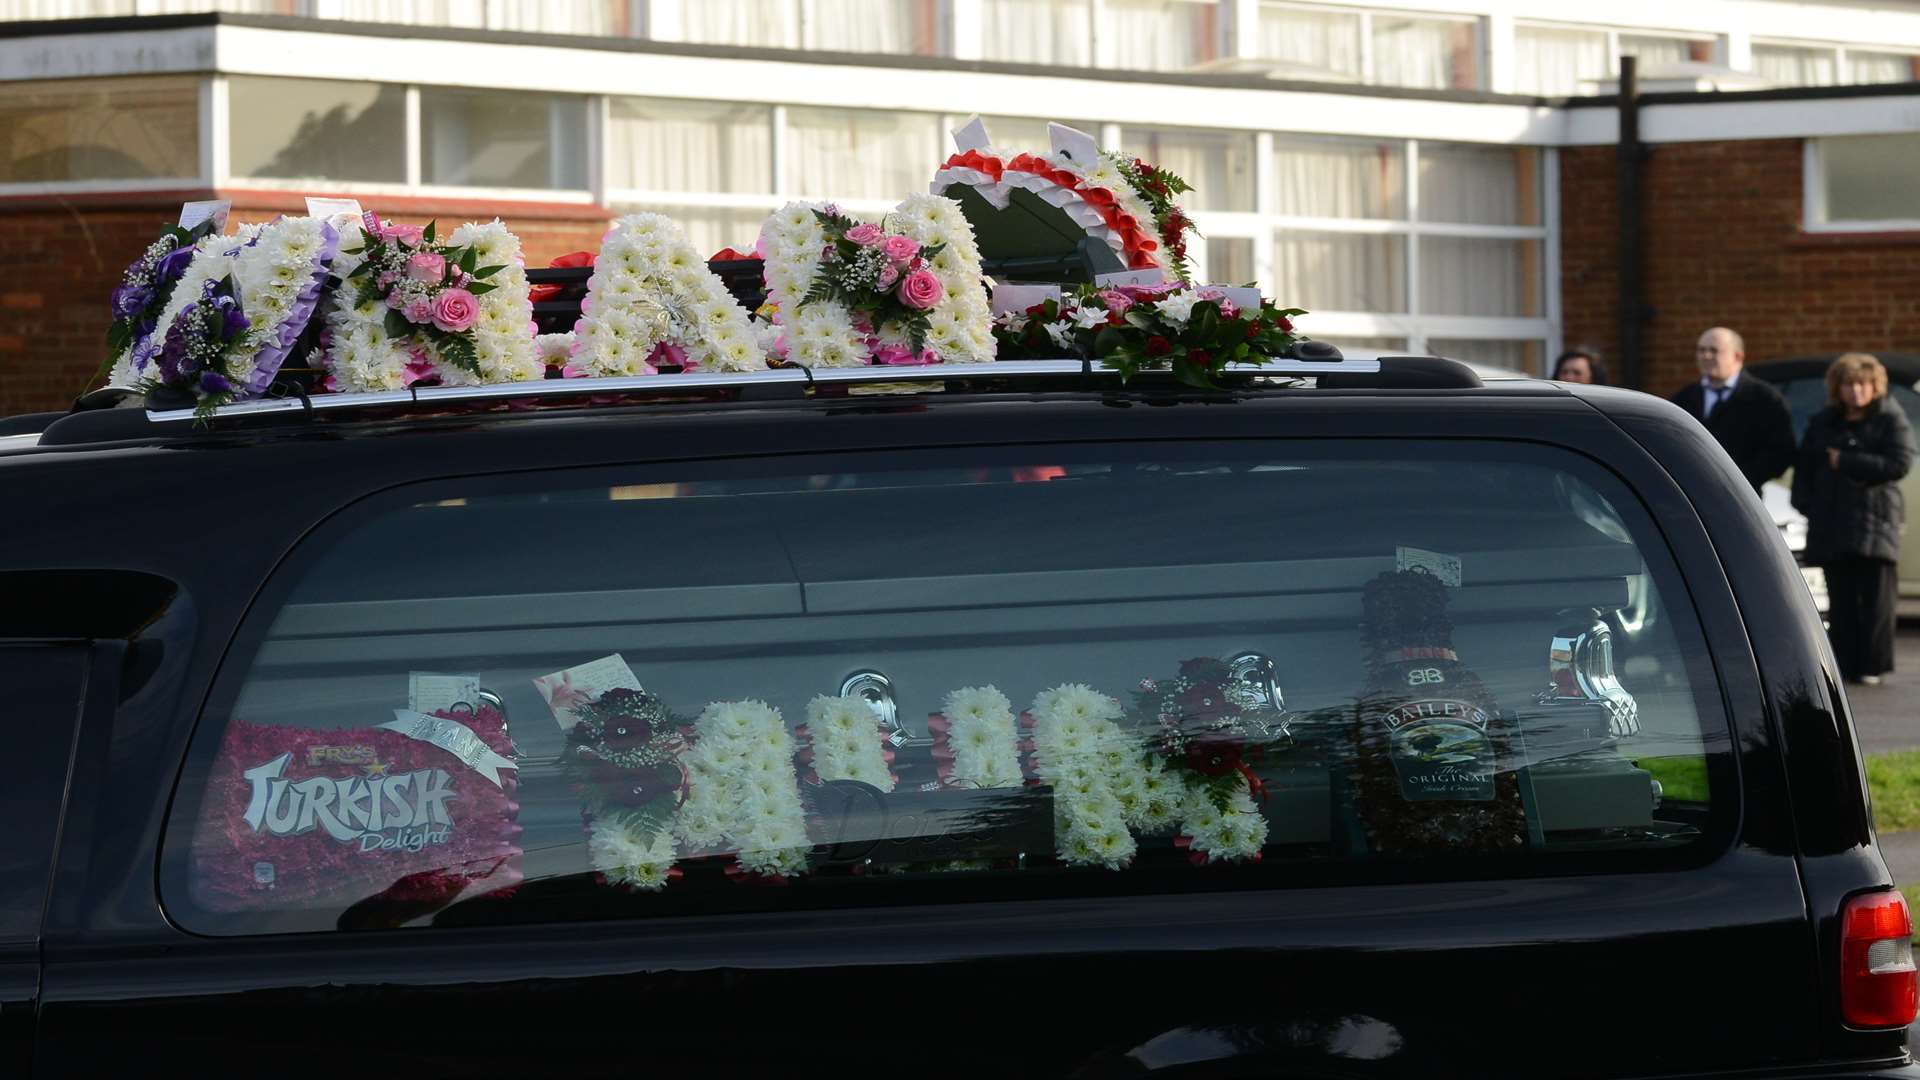 Colourful floral tributes read "Mum" and "Nan"